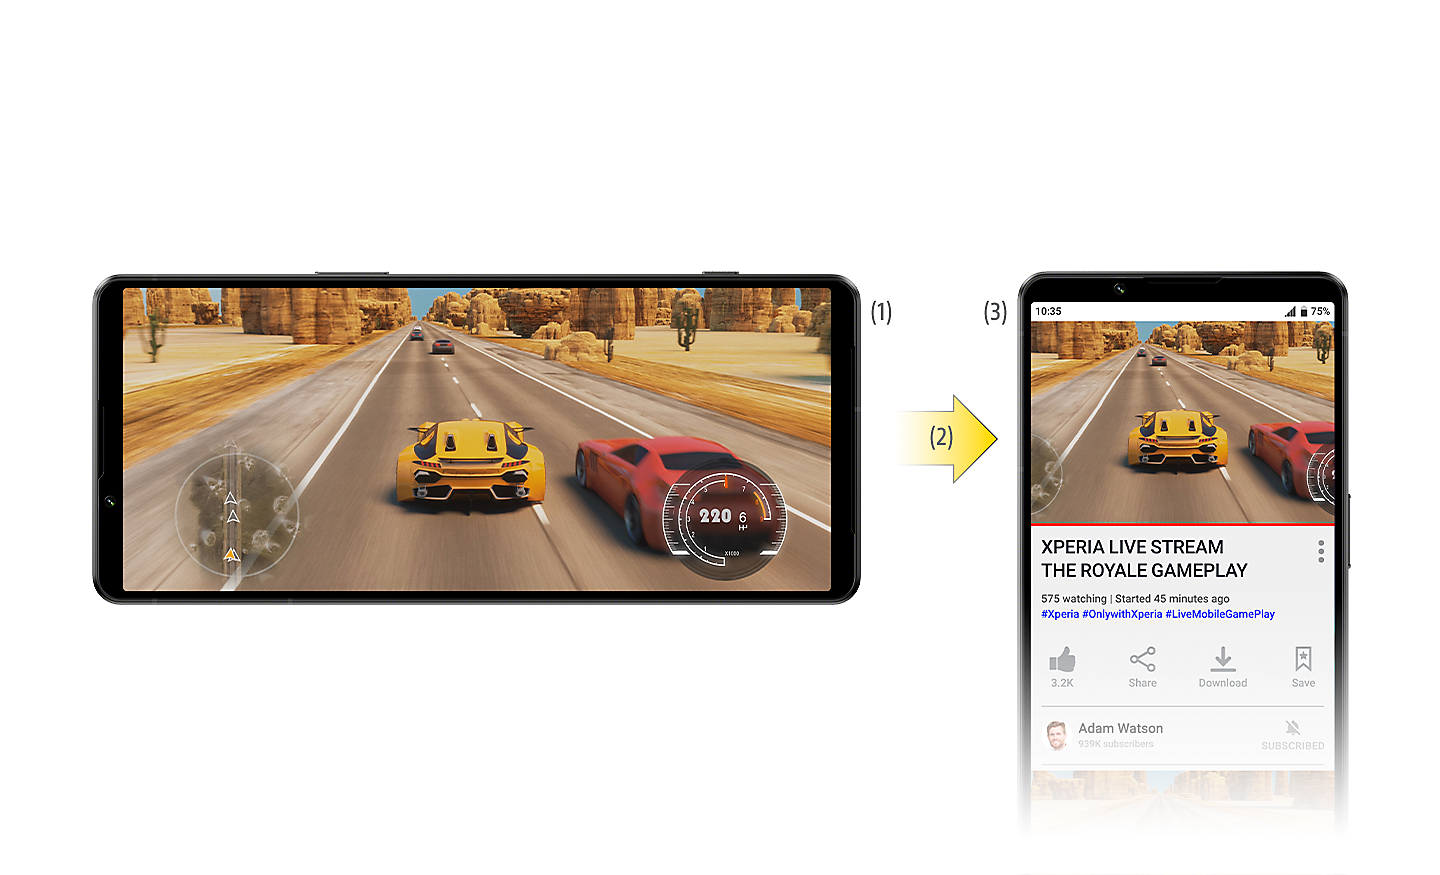 Annotated image of an Xperia 1 IV in landscape position and another in portrait position - both displaying gameplay